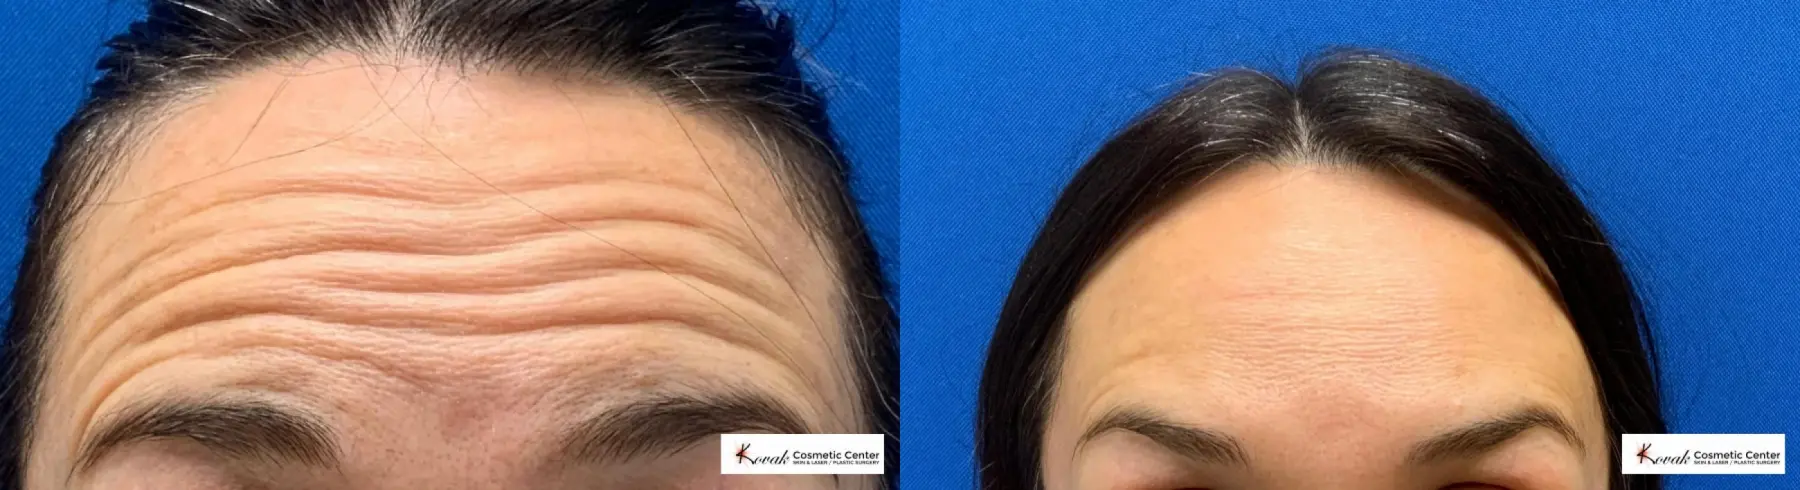 Neurotox Treatment using Jeuveau on a 40 year old female - Before and After 1